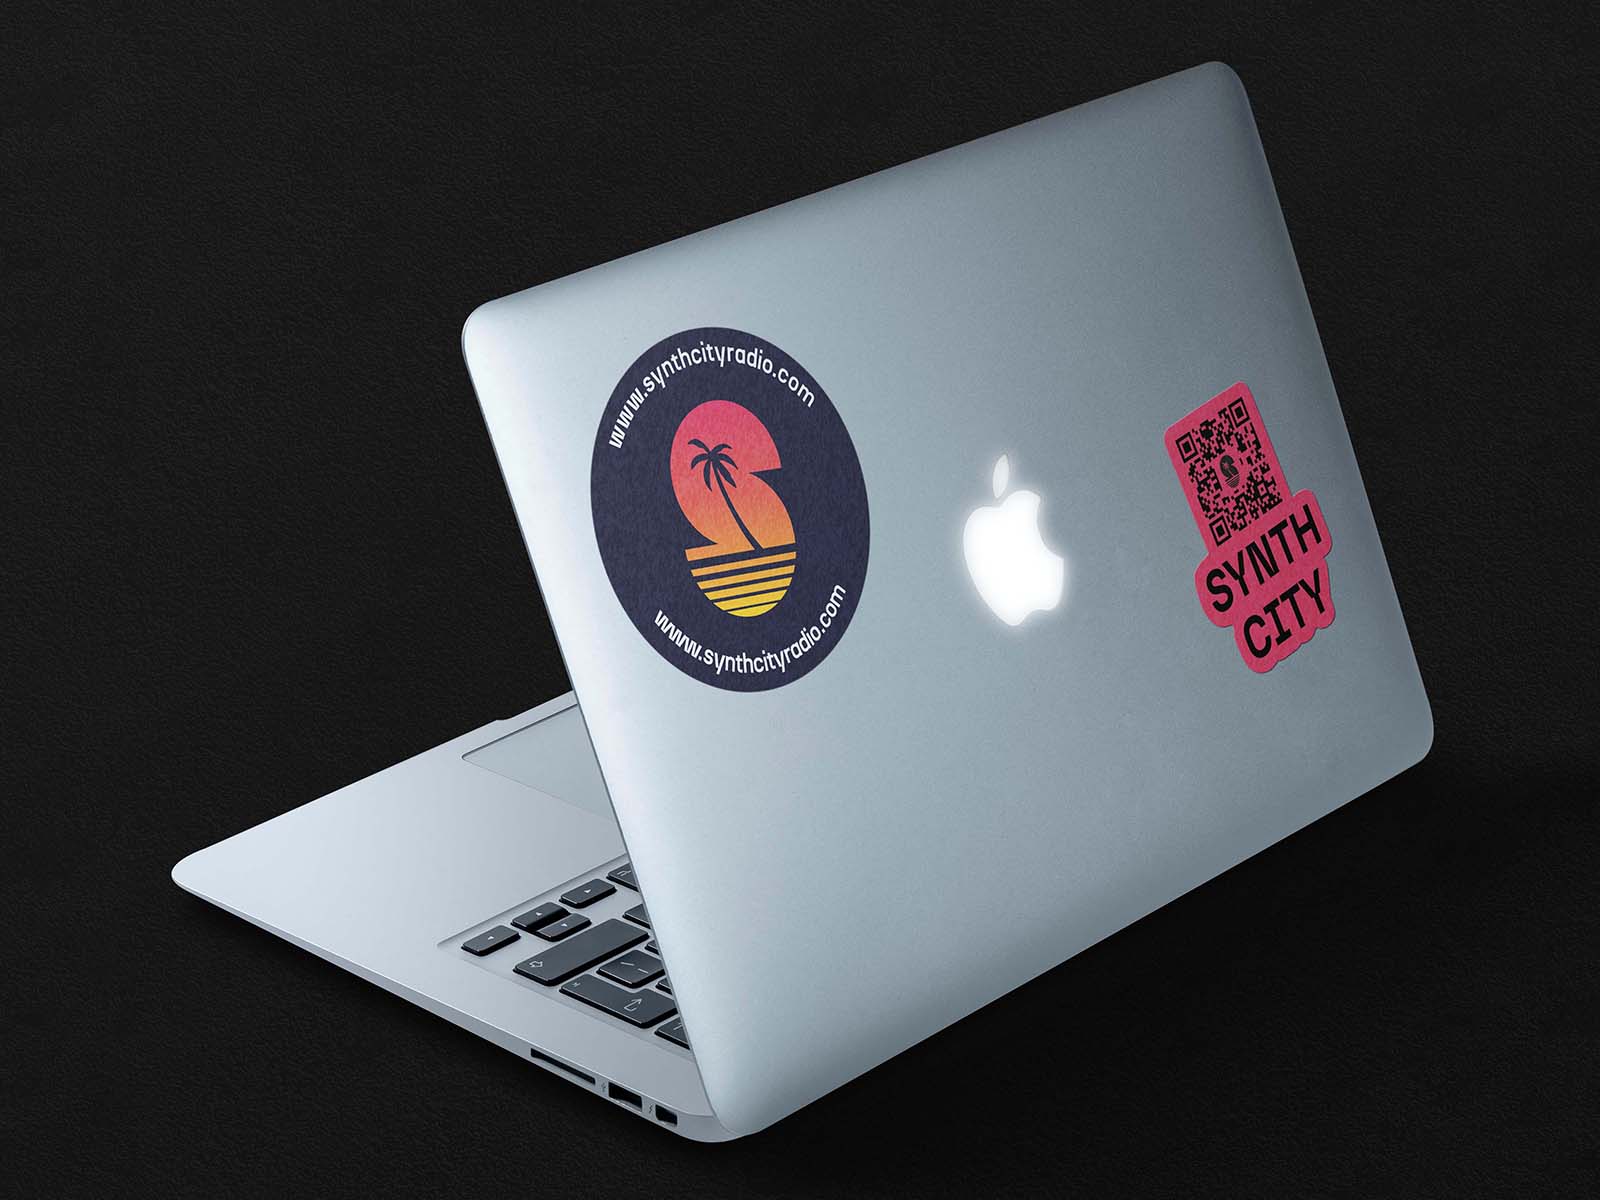 Synthcity stickers